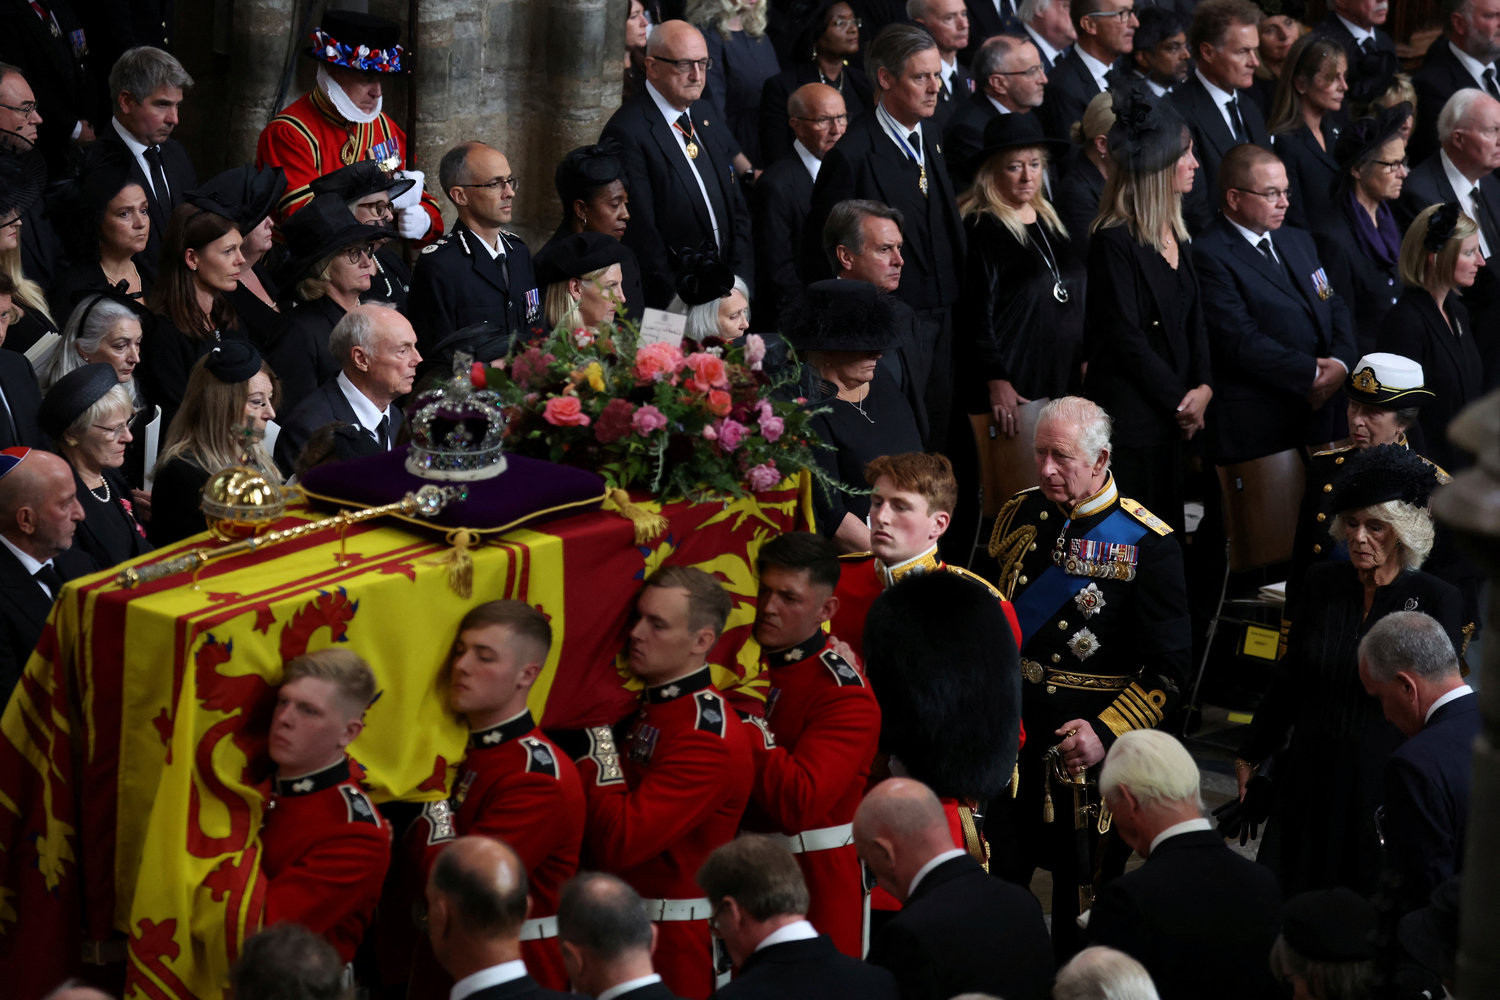 Britain's Queen Elizabeth's coffin is carried as King Charles III, Camilla, the Queen Consort and Princess Anne follow, during the funeral in London, Monday Sept. 19, 2022.